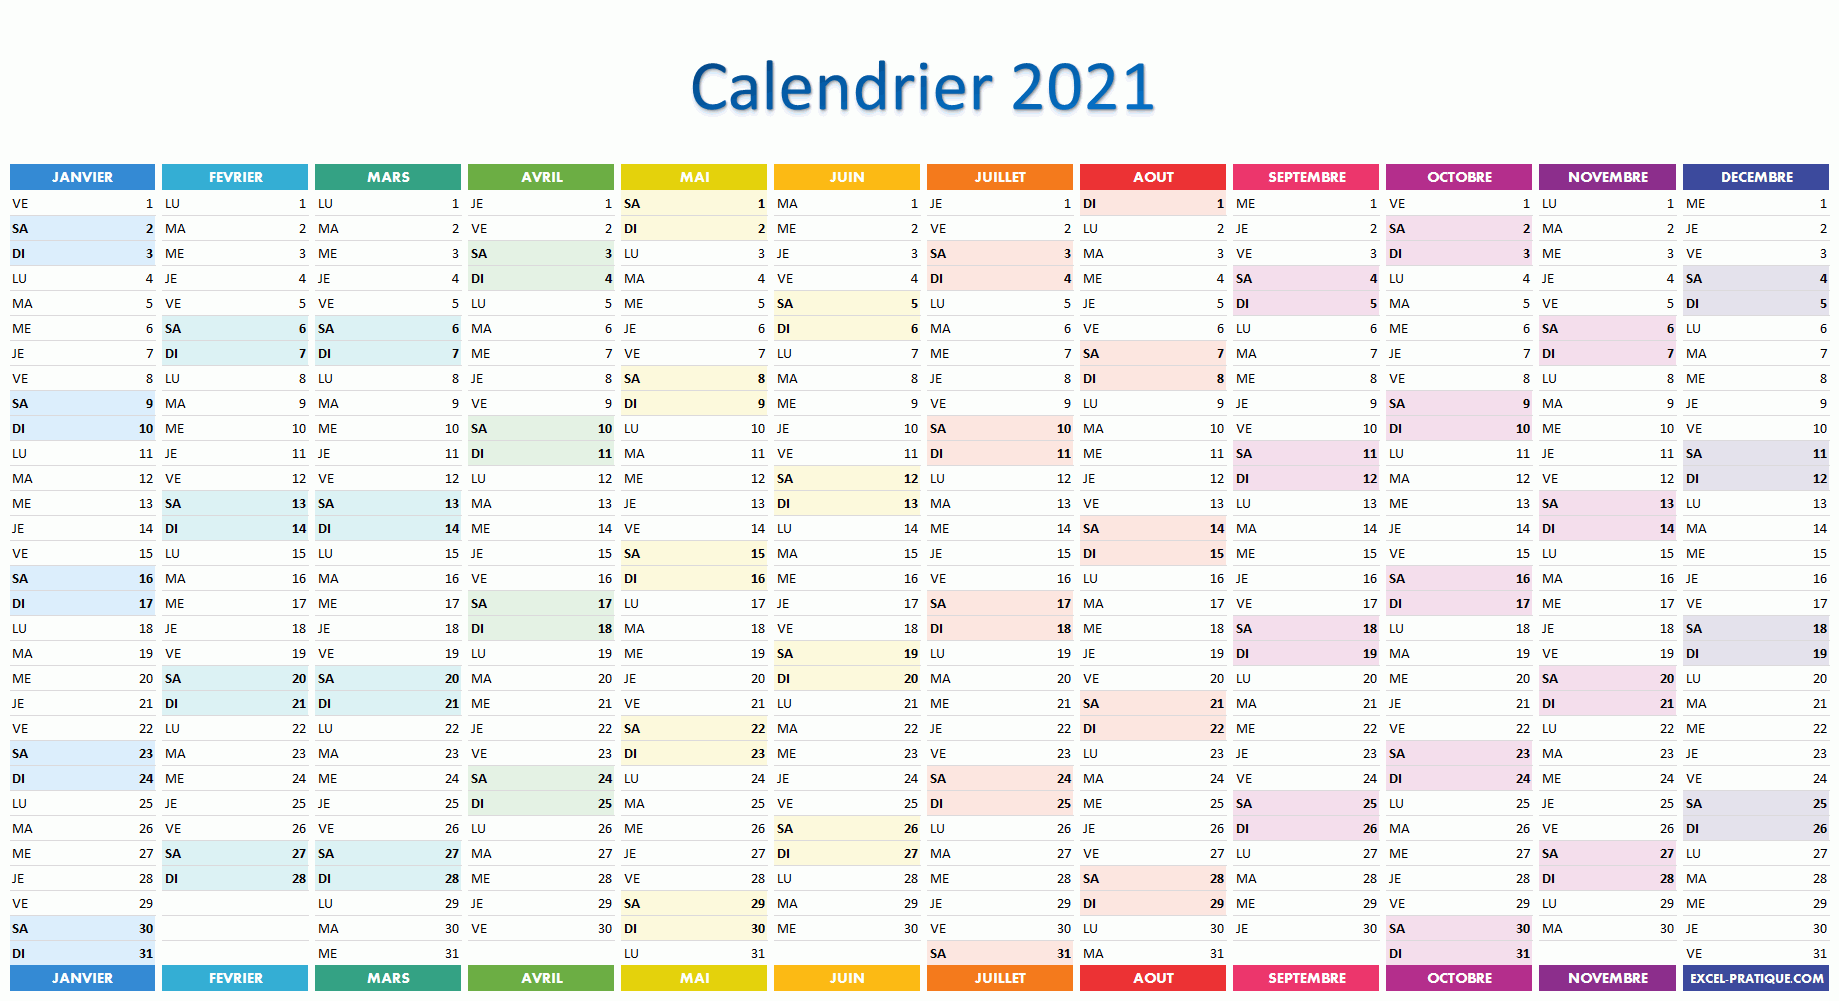 Calendrier 2021 Open Office Calendrier 2021 simple